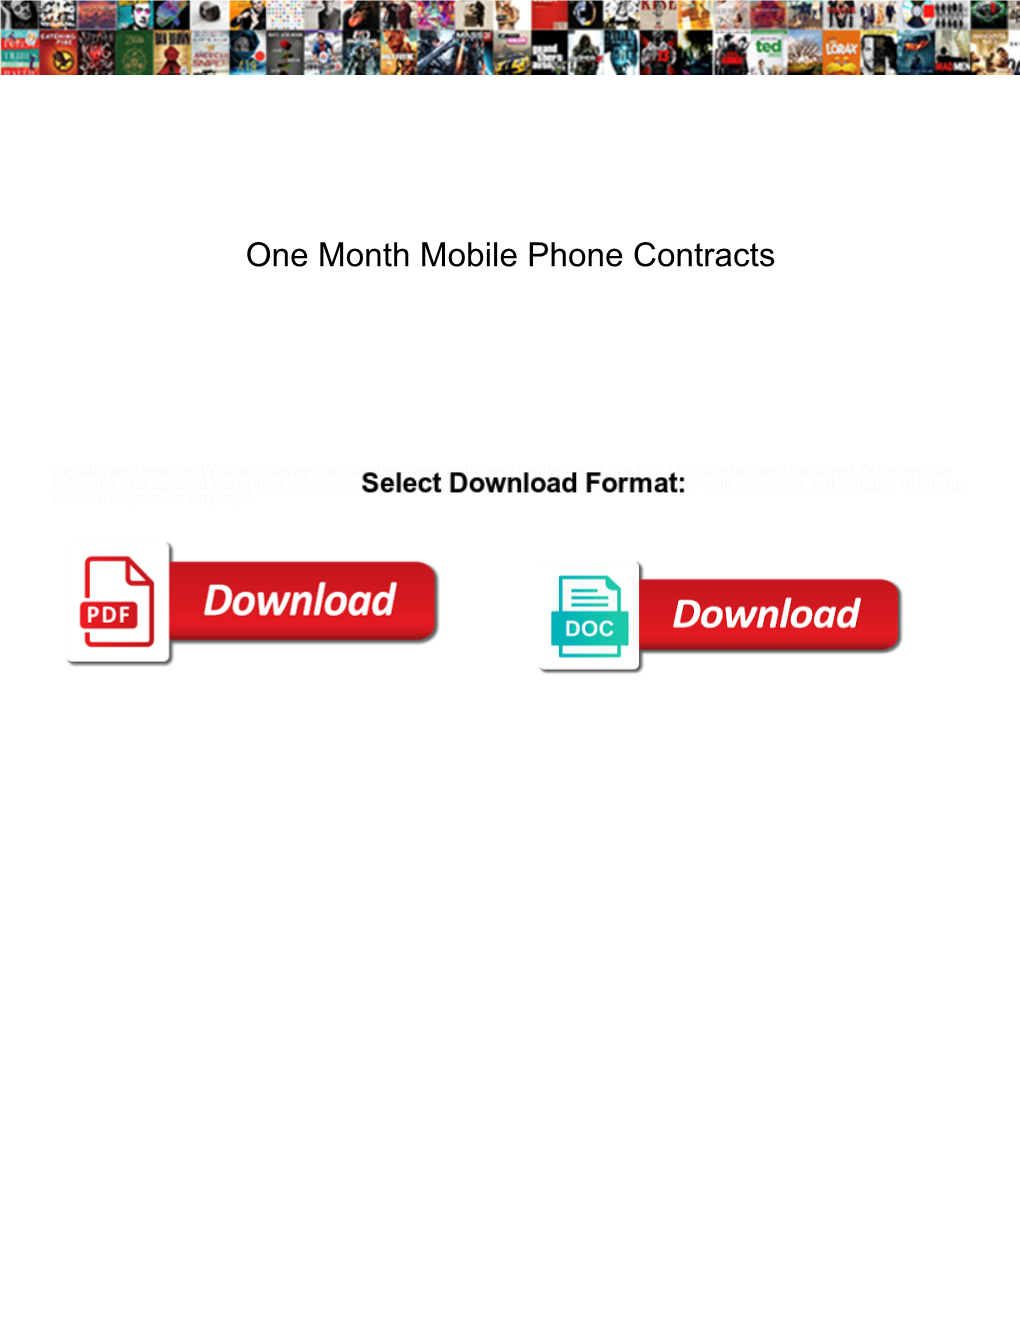 One Month Mobile Phone Contracts